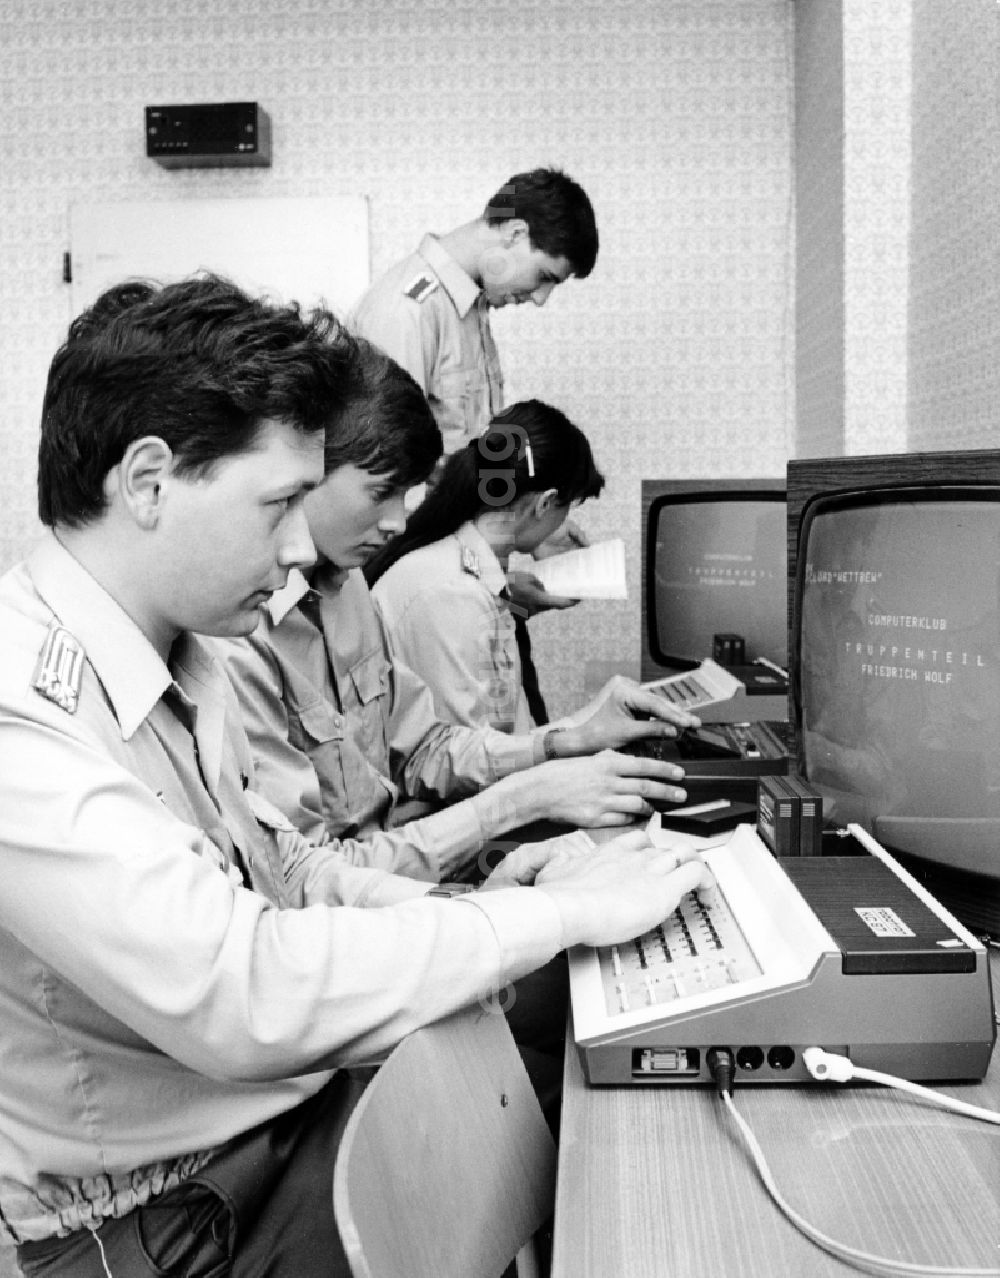 GDR image archive: Beelitz - Computer Club with young soldiers on the screens of Robotron - computers of the NVA regiment, Friedrich Wolf in Beelitz in present-day state of Brandenburg